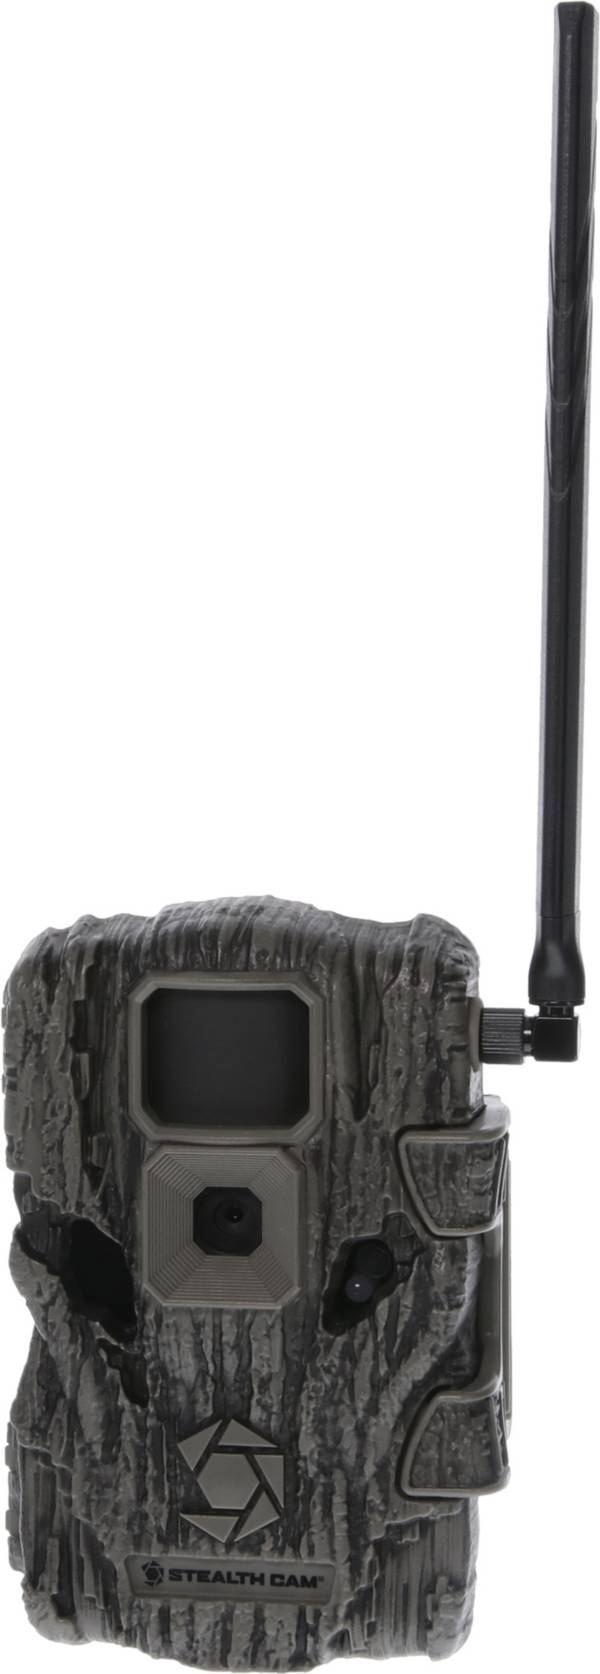 Stealth Cam Fusion X A26 Cellular Camera – 26MP product image